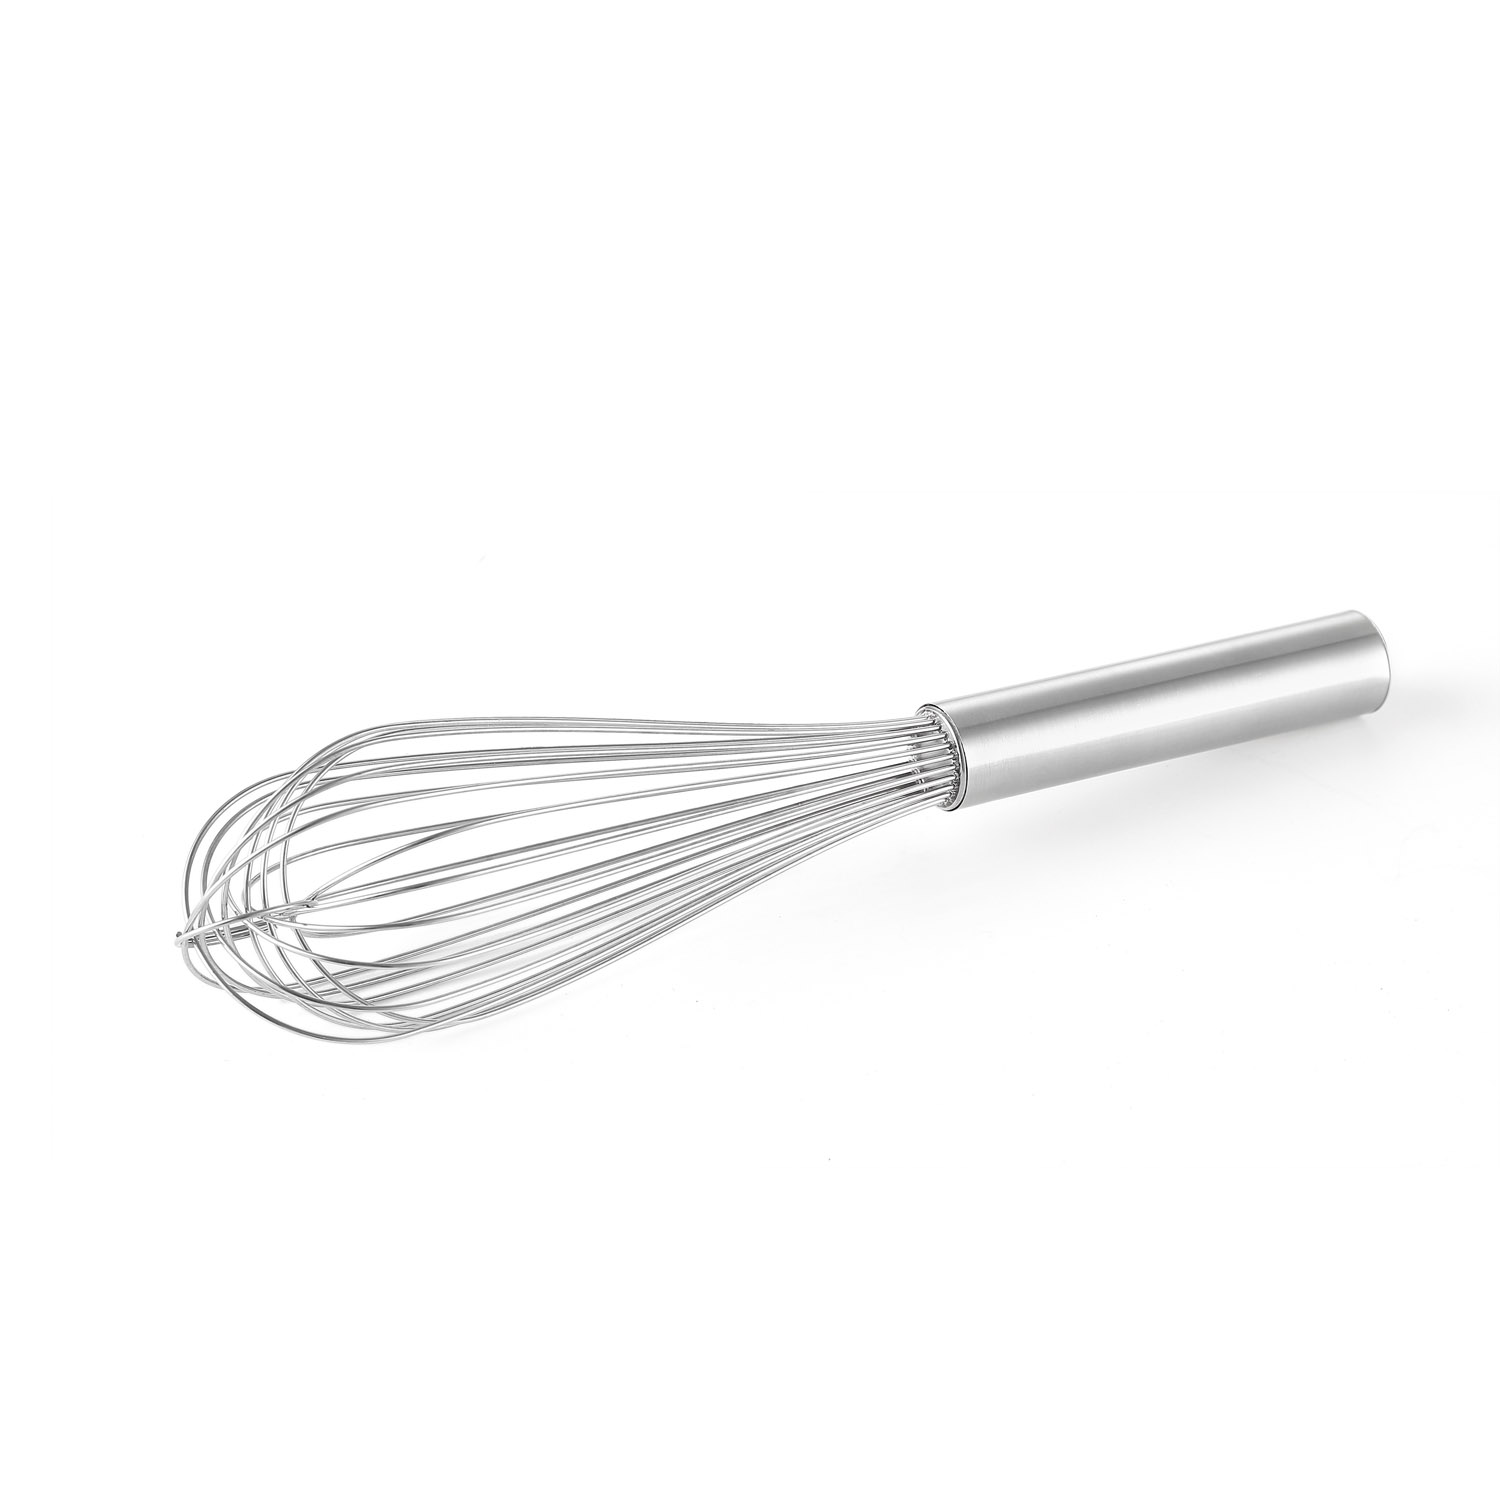 CAC China WPPA-12S Stainless Steel Piano Whip 12"